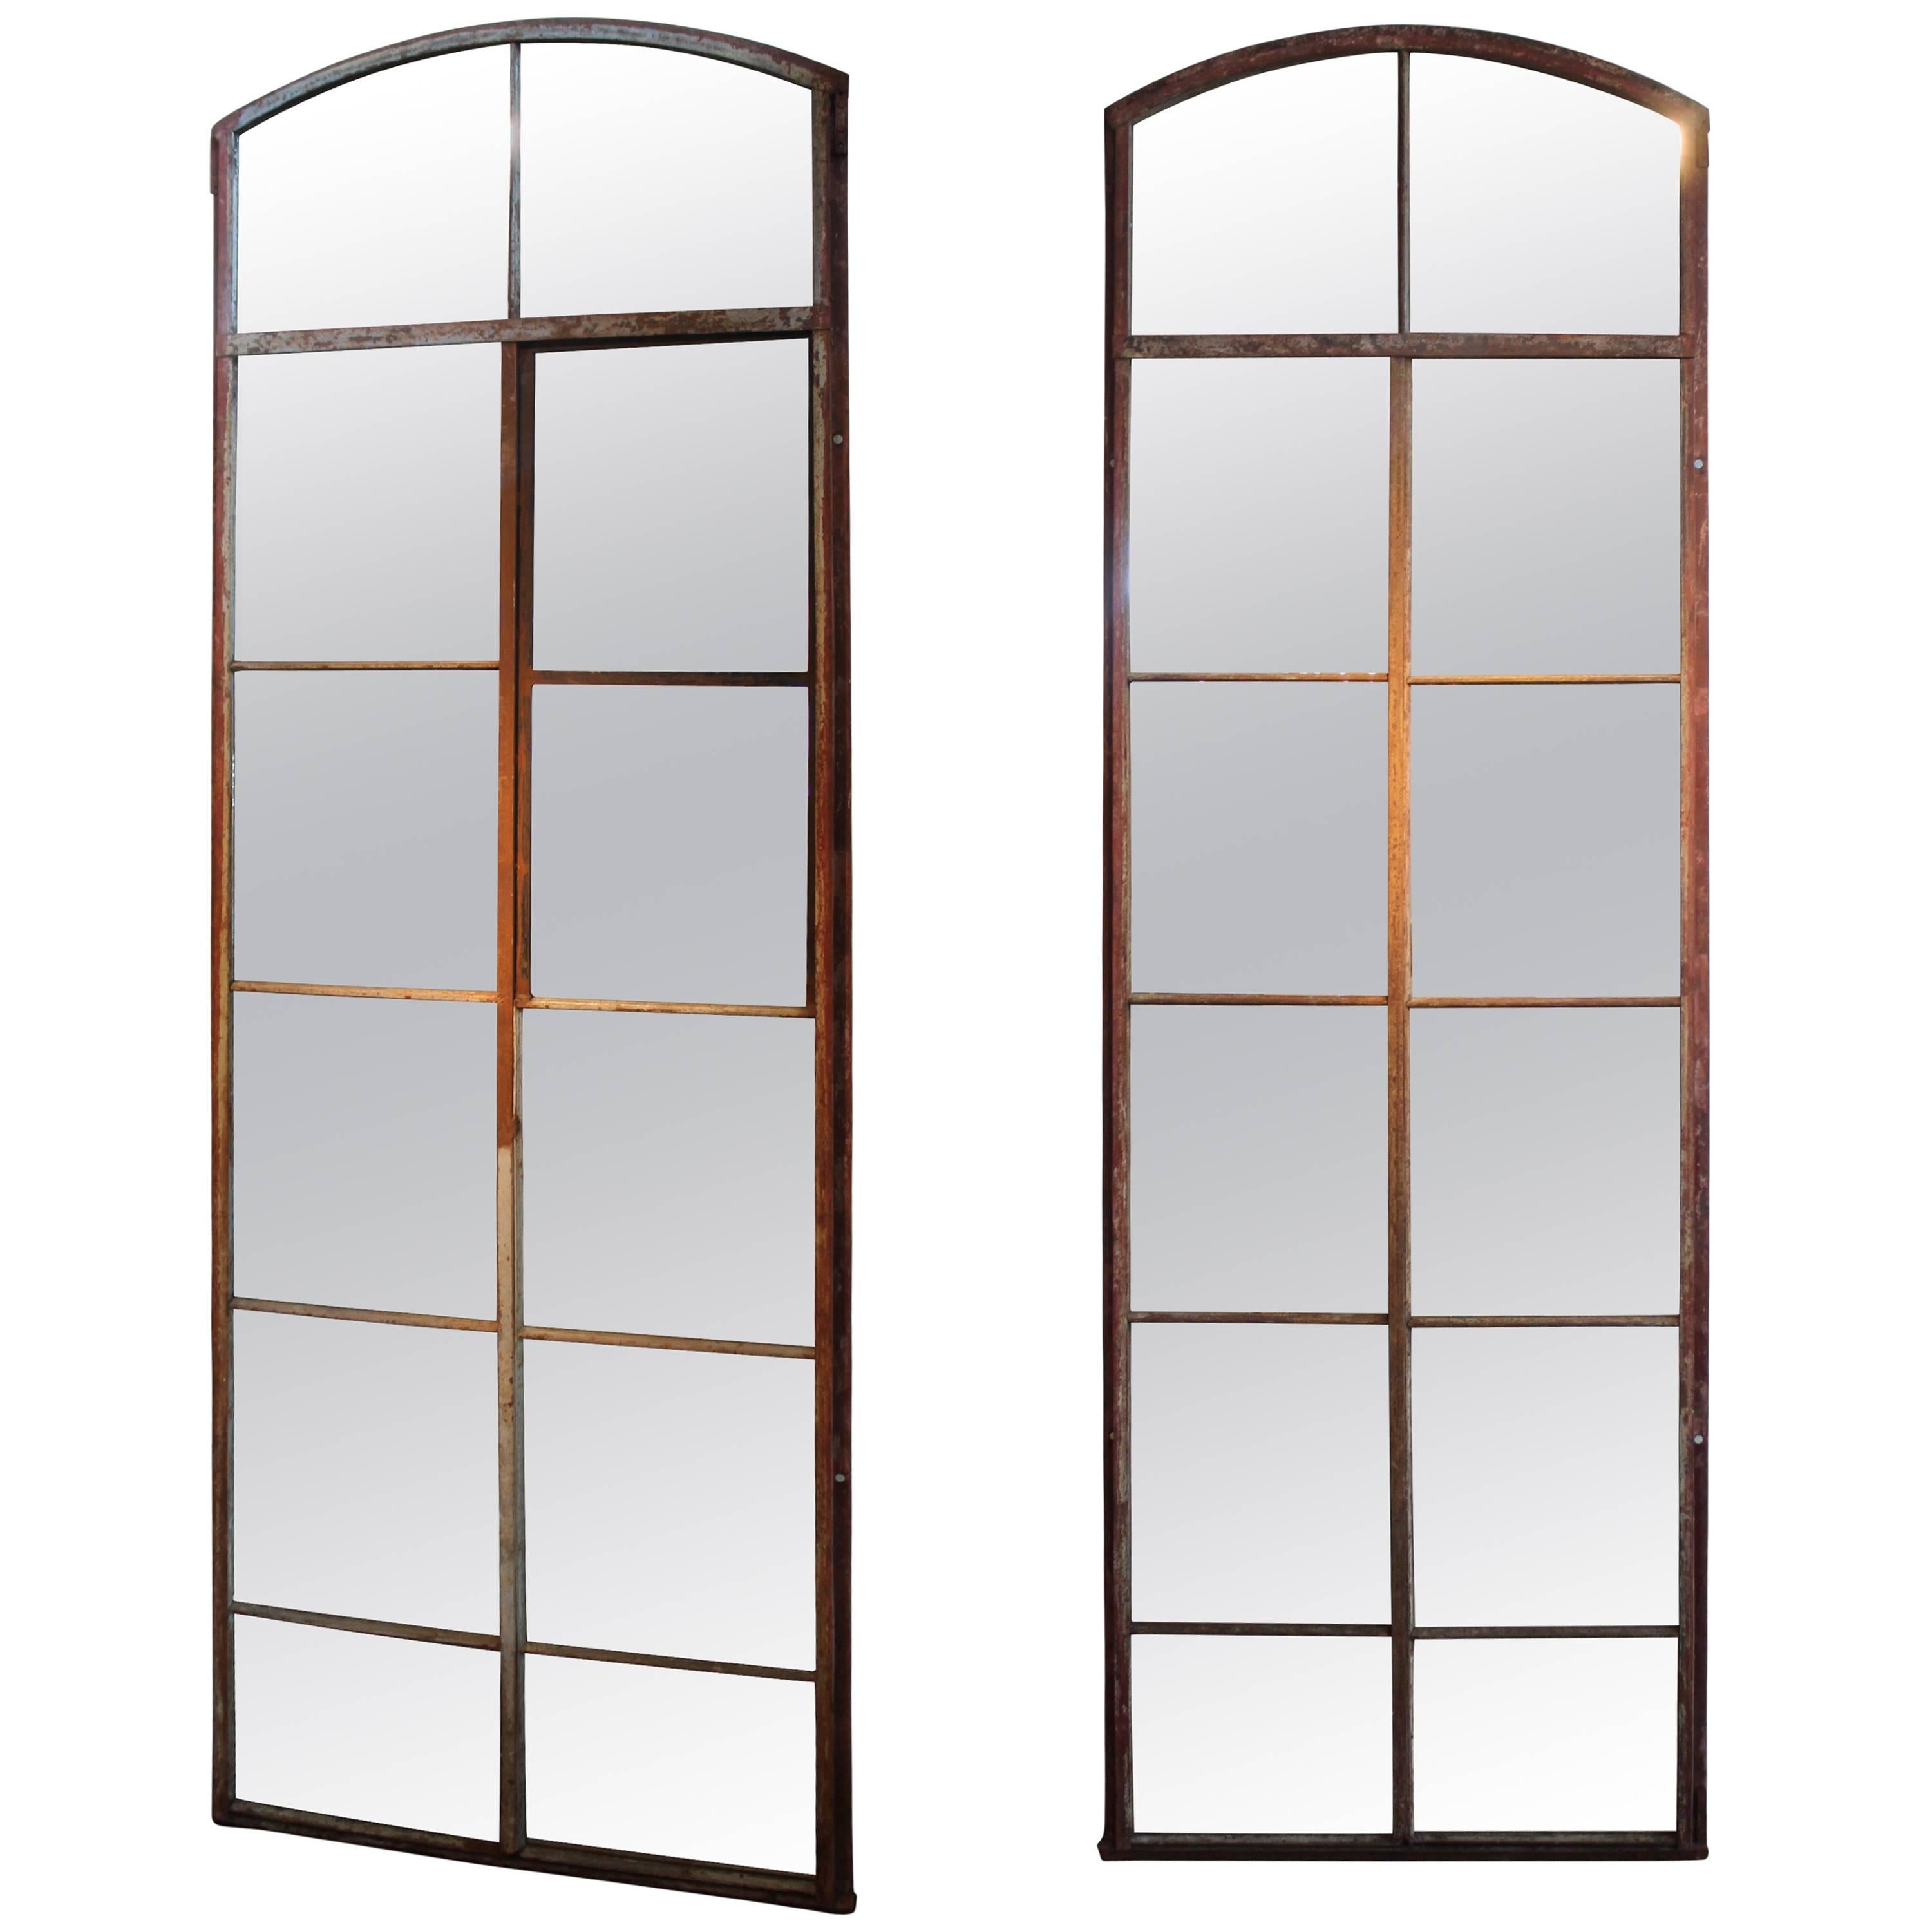 Tall Arch Industrial Window Frame Floor Mirrors